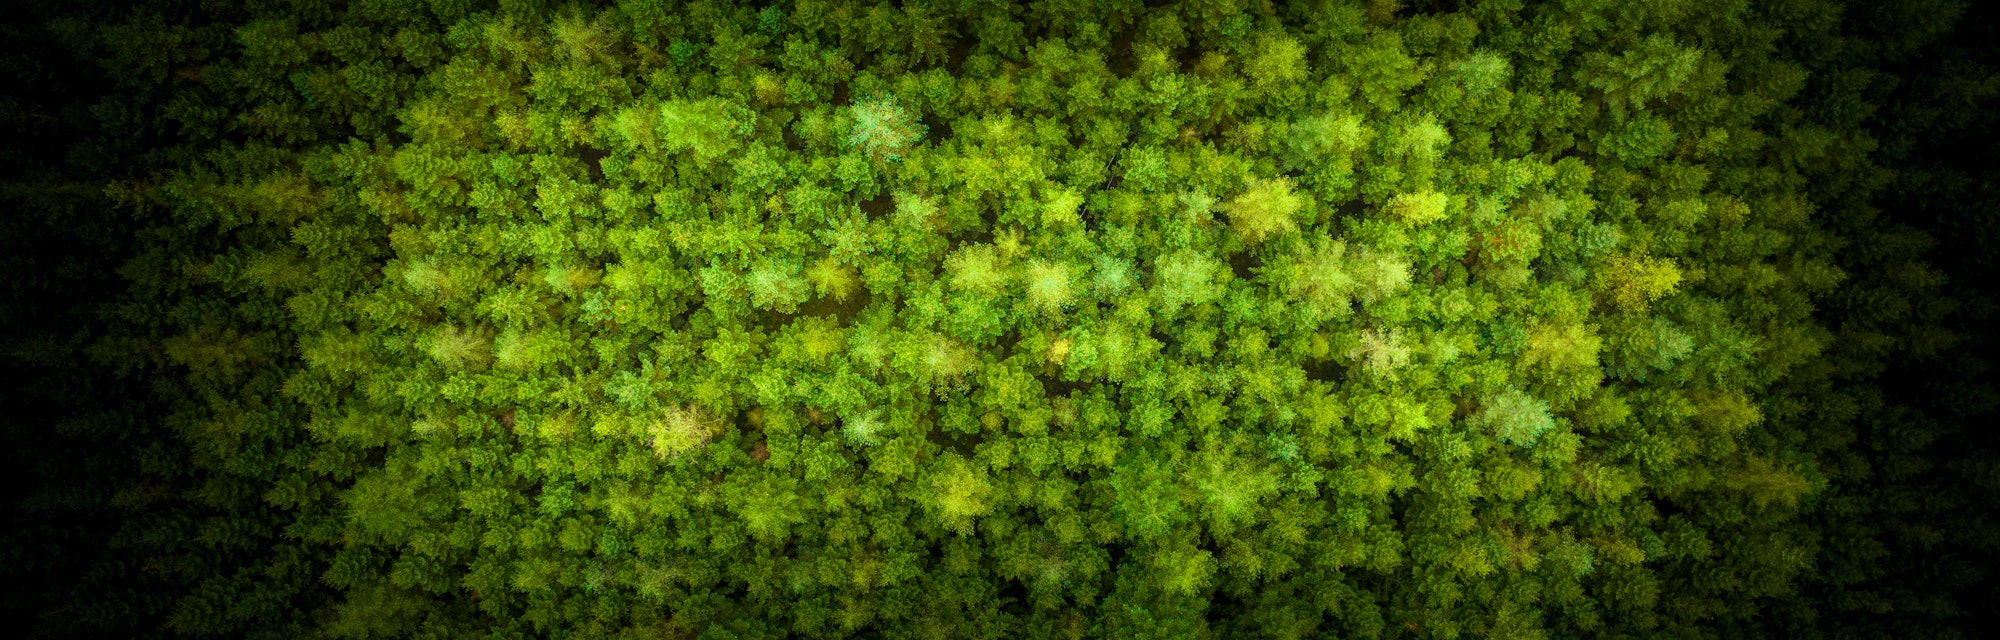 This is a drone photo of trees in the forest.